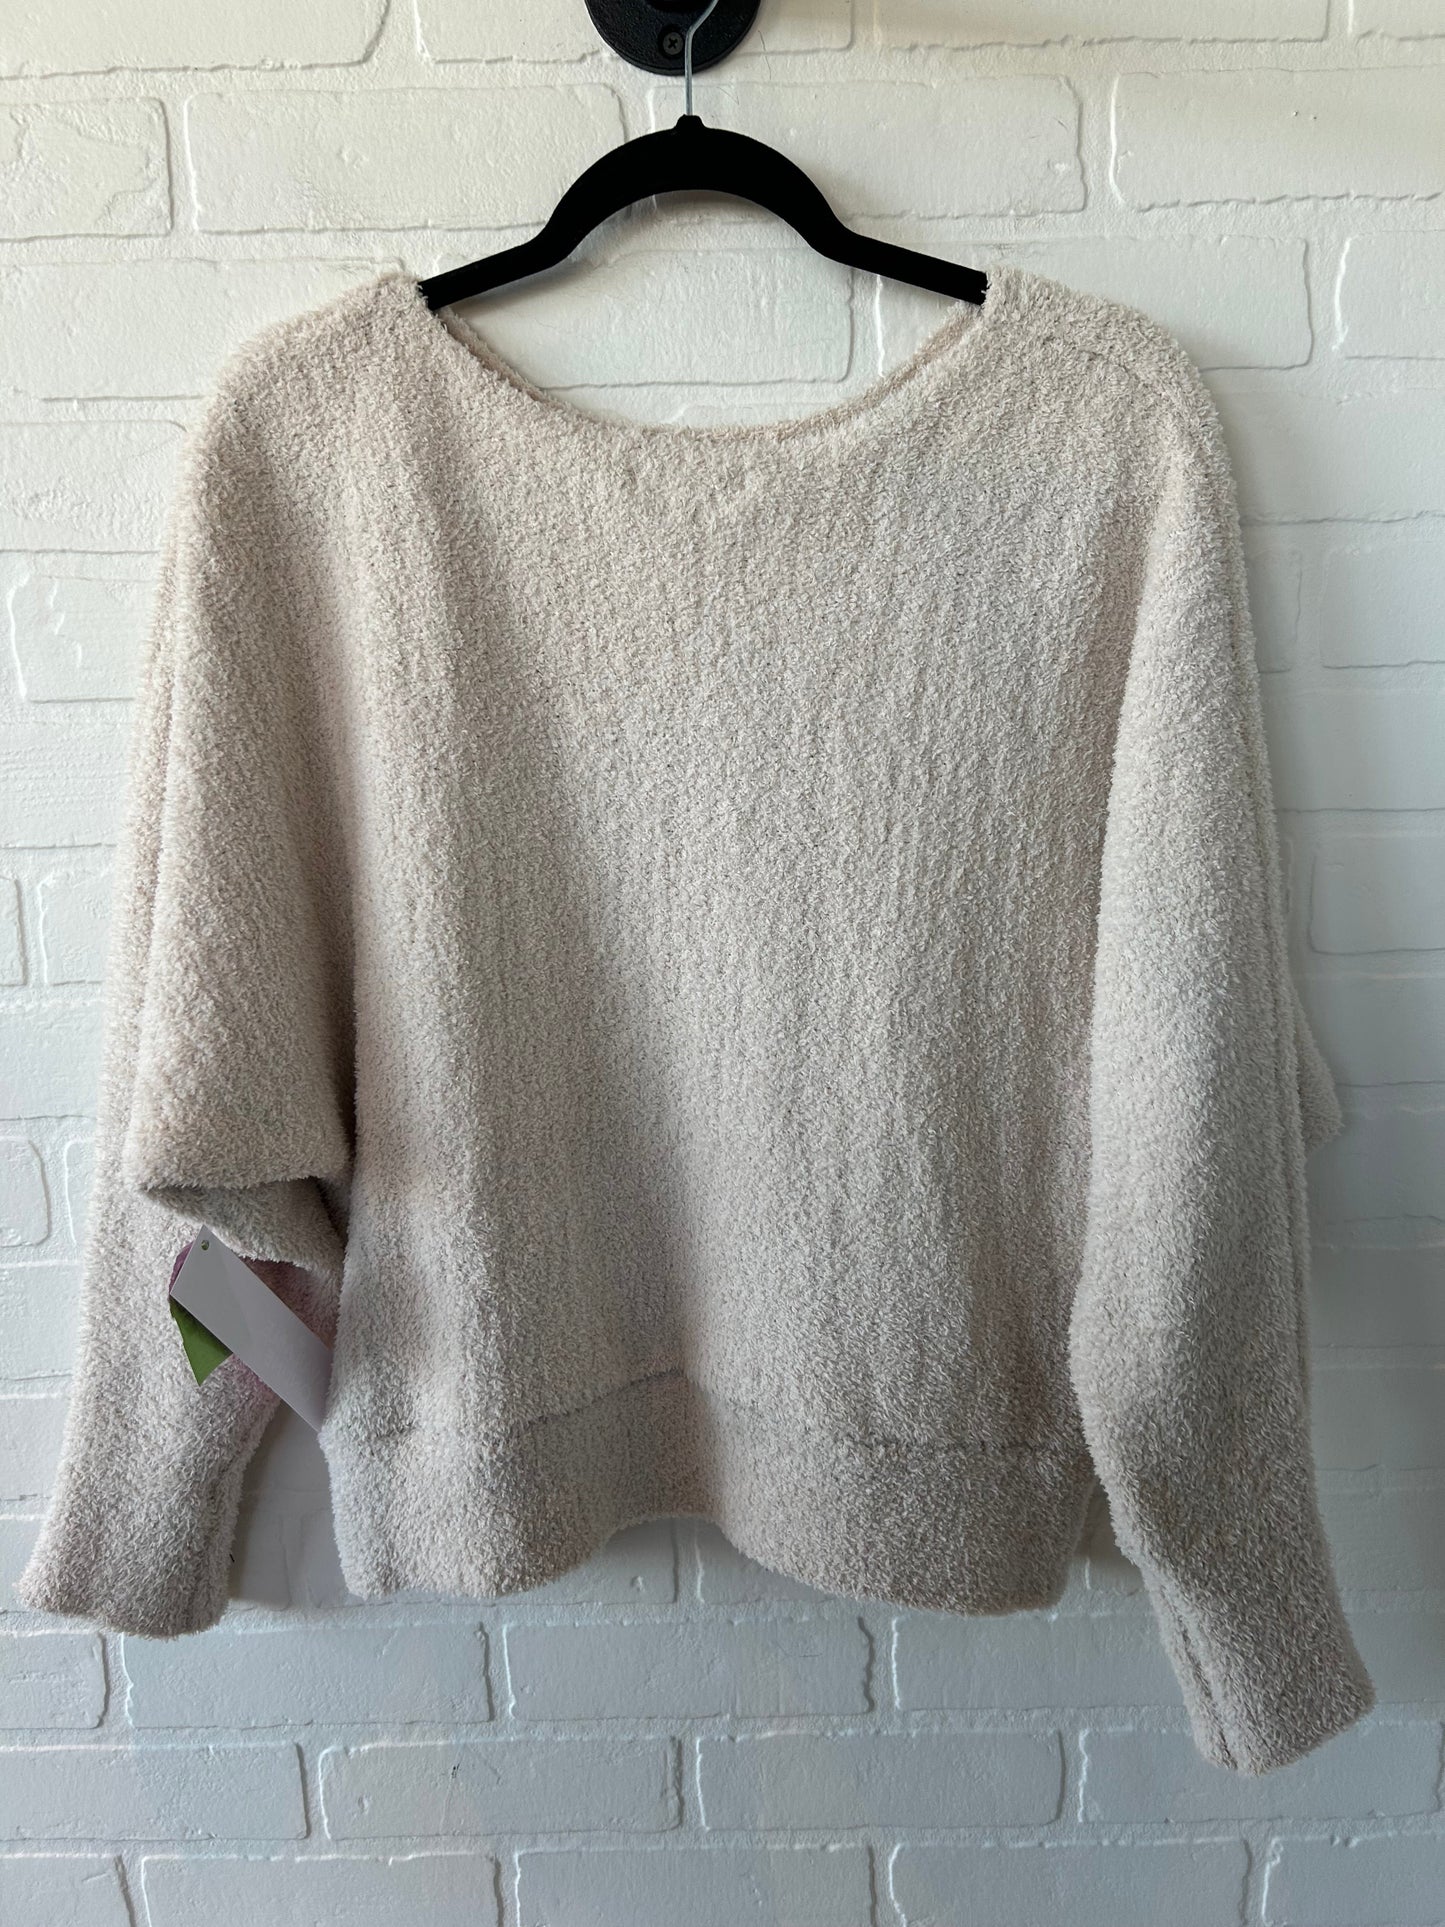 Sweater By Jessica Simpson  Size: M